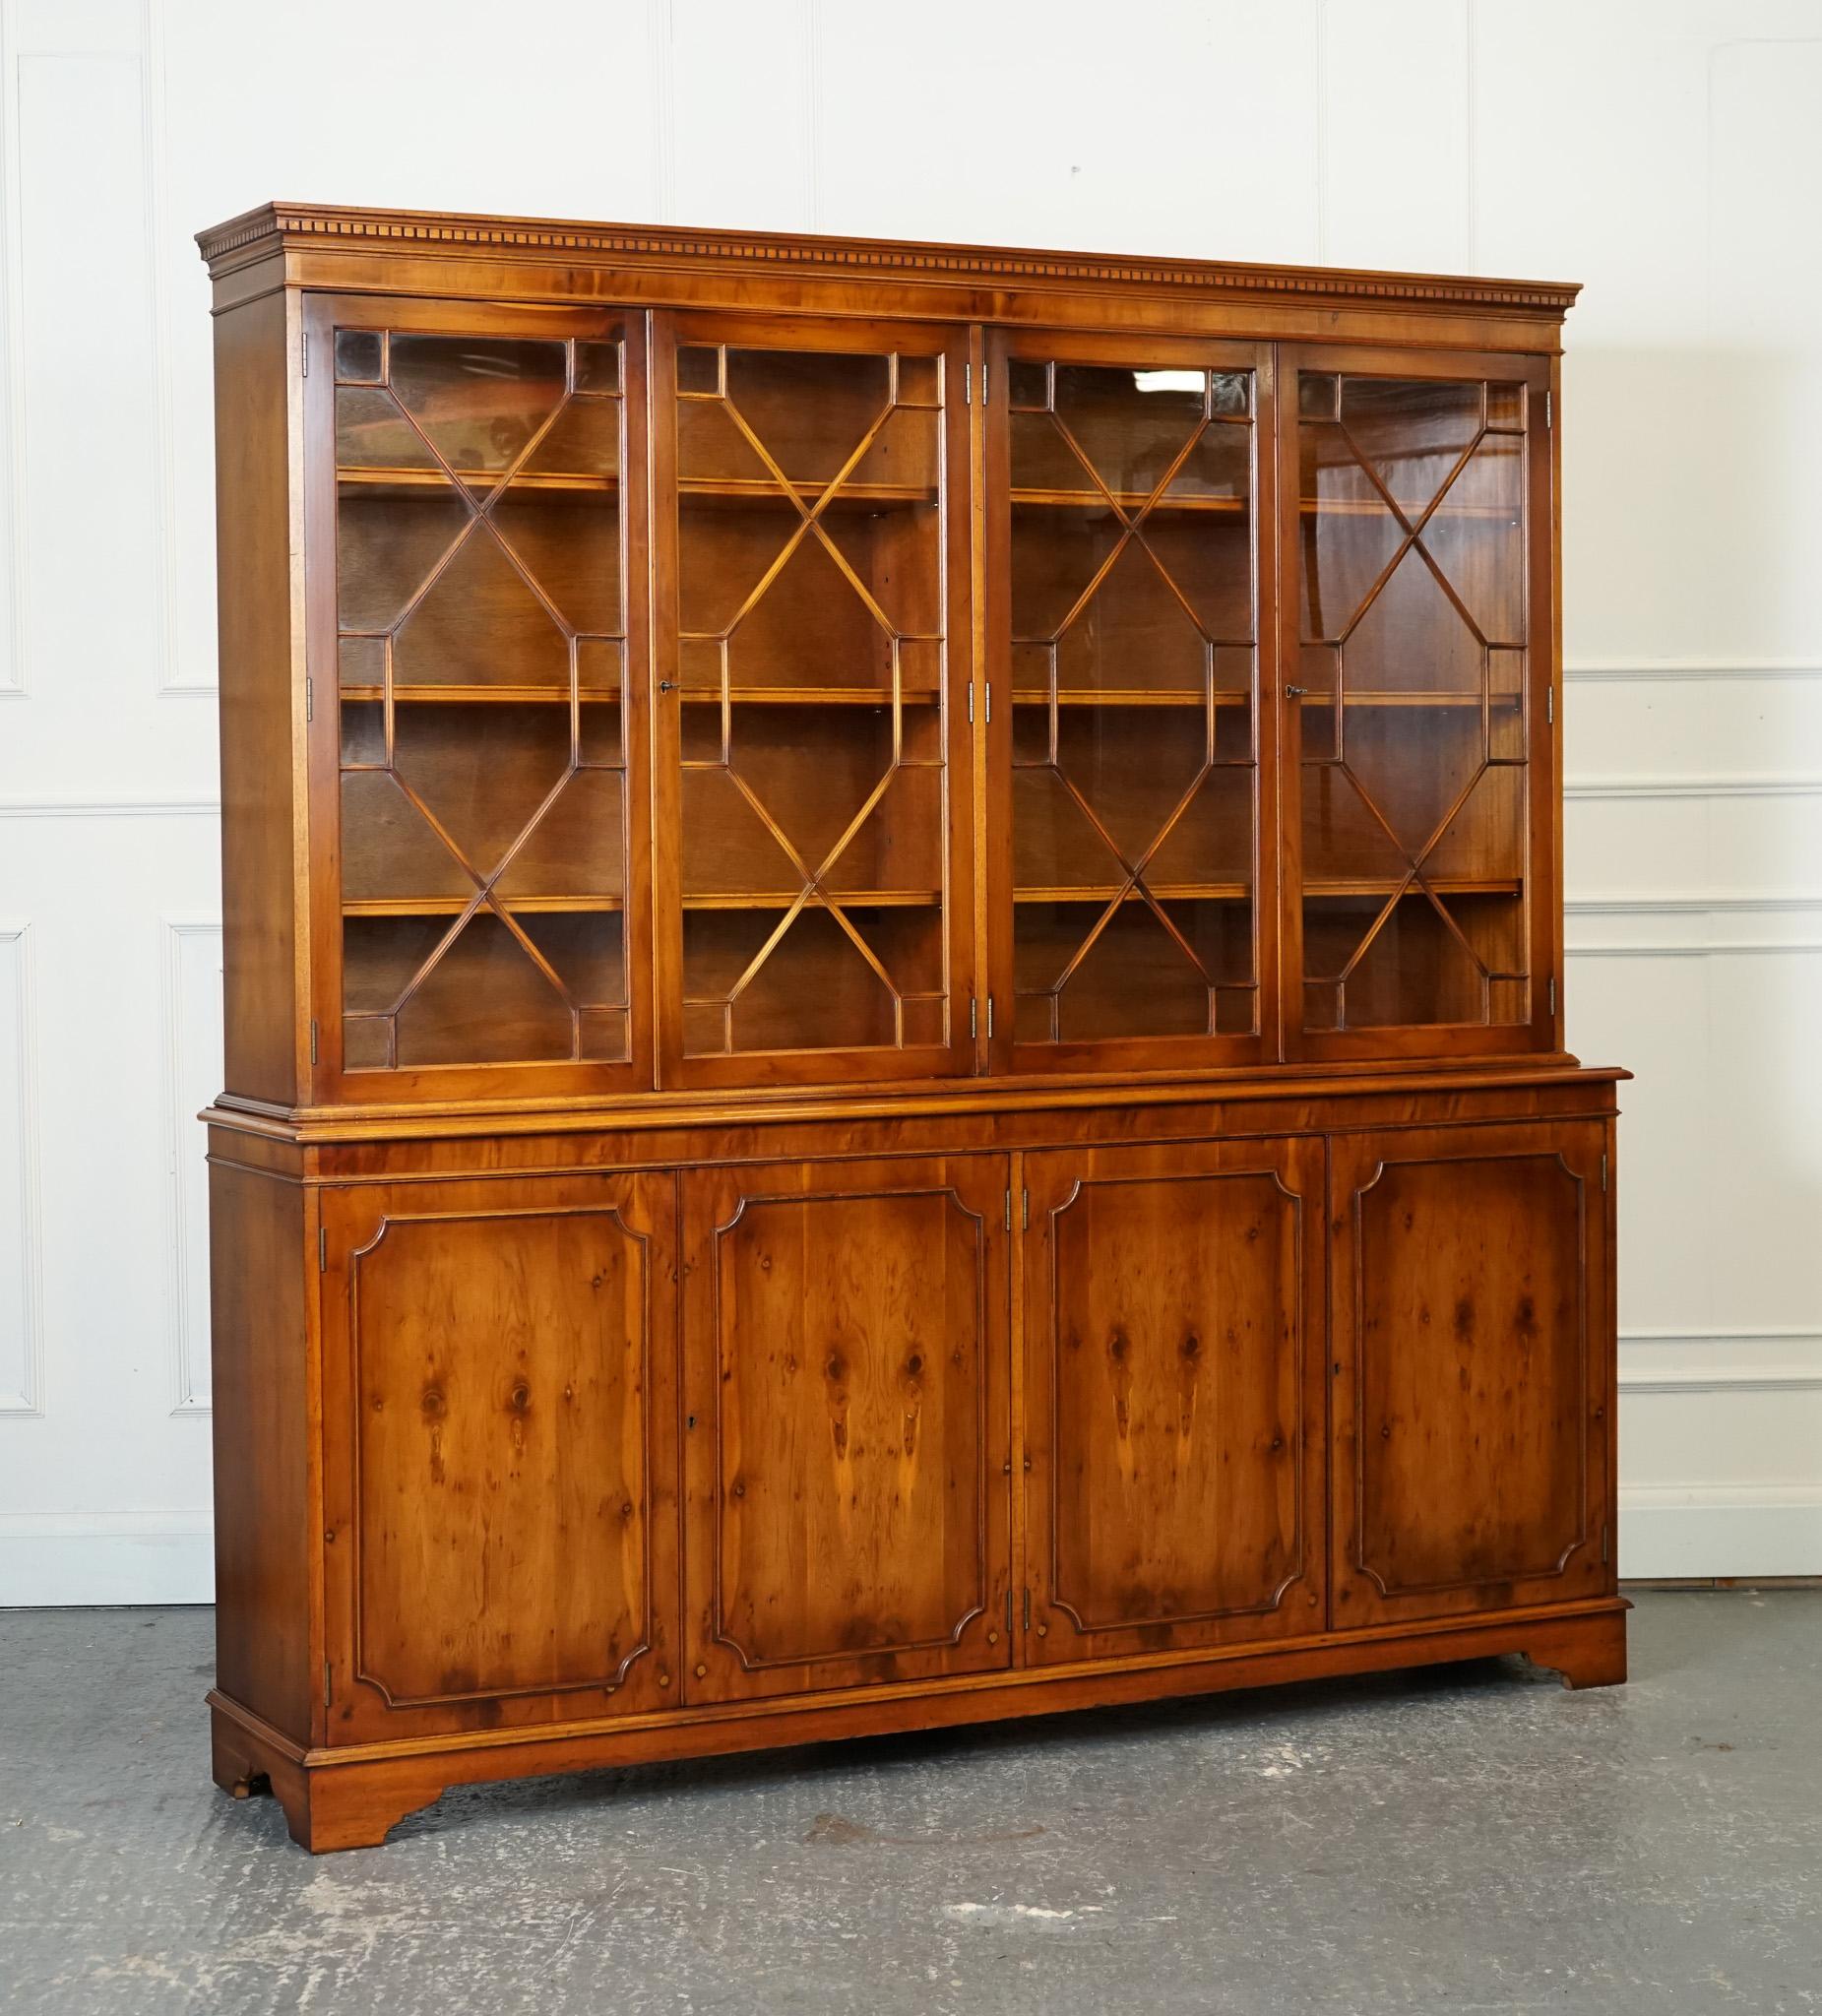 Antiques of London



We are delighted to offer for sale this Stunning Vintage Burr Yew Wood Display Cabinet.

A burr yew wood eight-door display cabinet is an elegant and sophisticated piece of furniture that exudes luxury and craftsmanship. Made